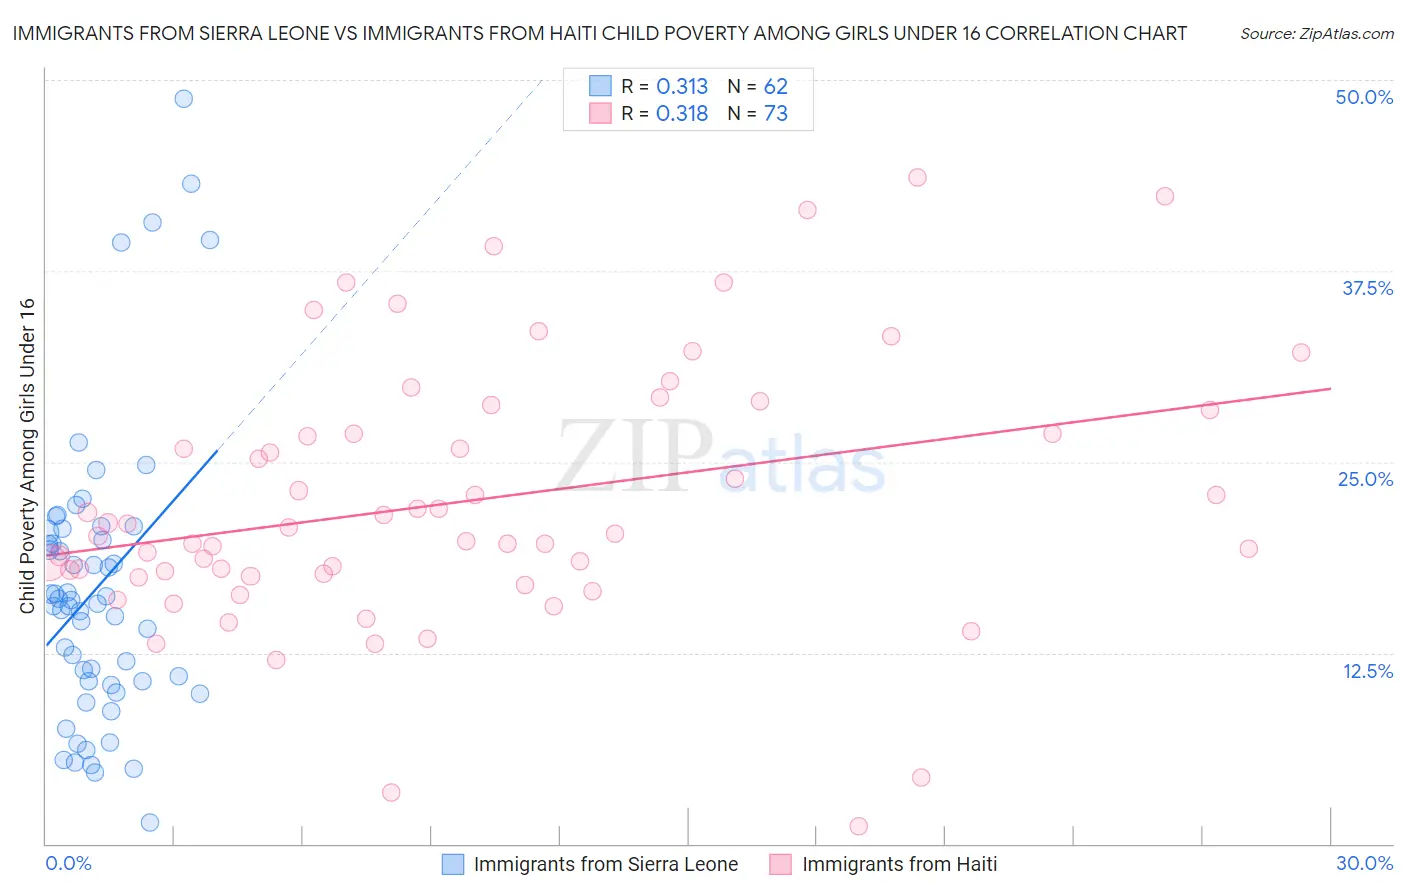 Immigrants from Sierra Leone vs Immigrants from Haiti Child Poverty Among Girls Under 16